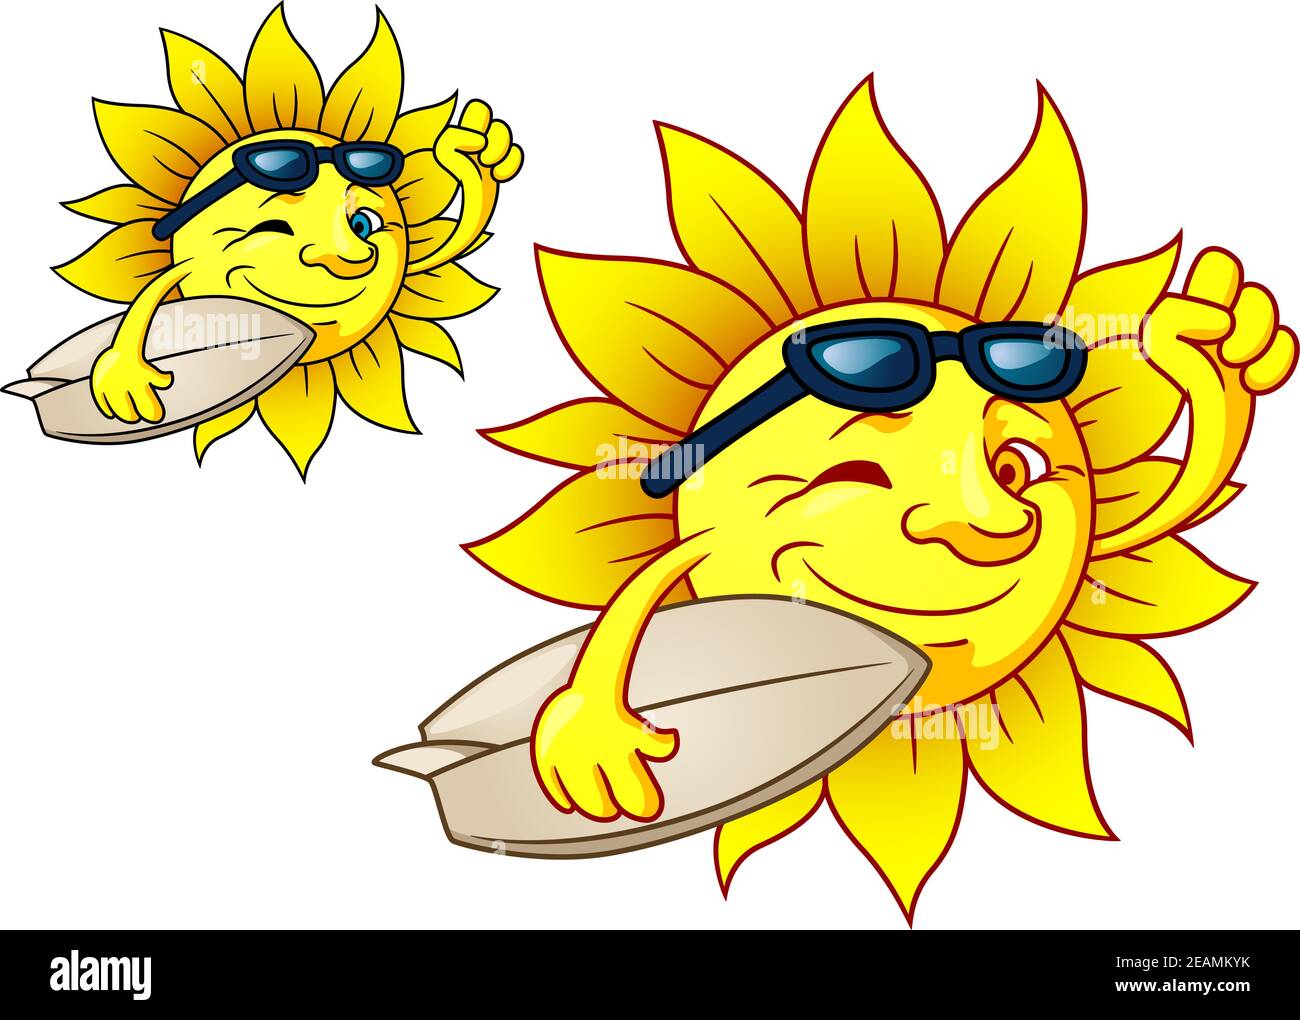 Cute cartoon bright yellow hot surfing sun with sunglasses carrying a surfboard, two color variations on white Stock Vector